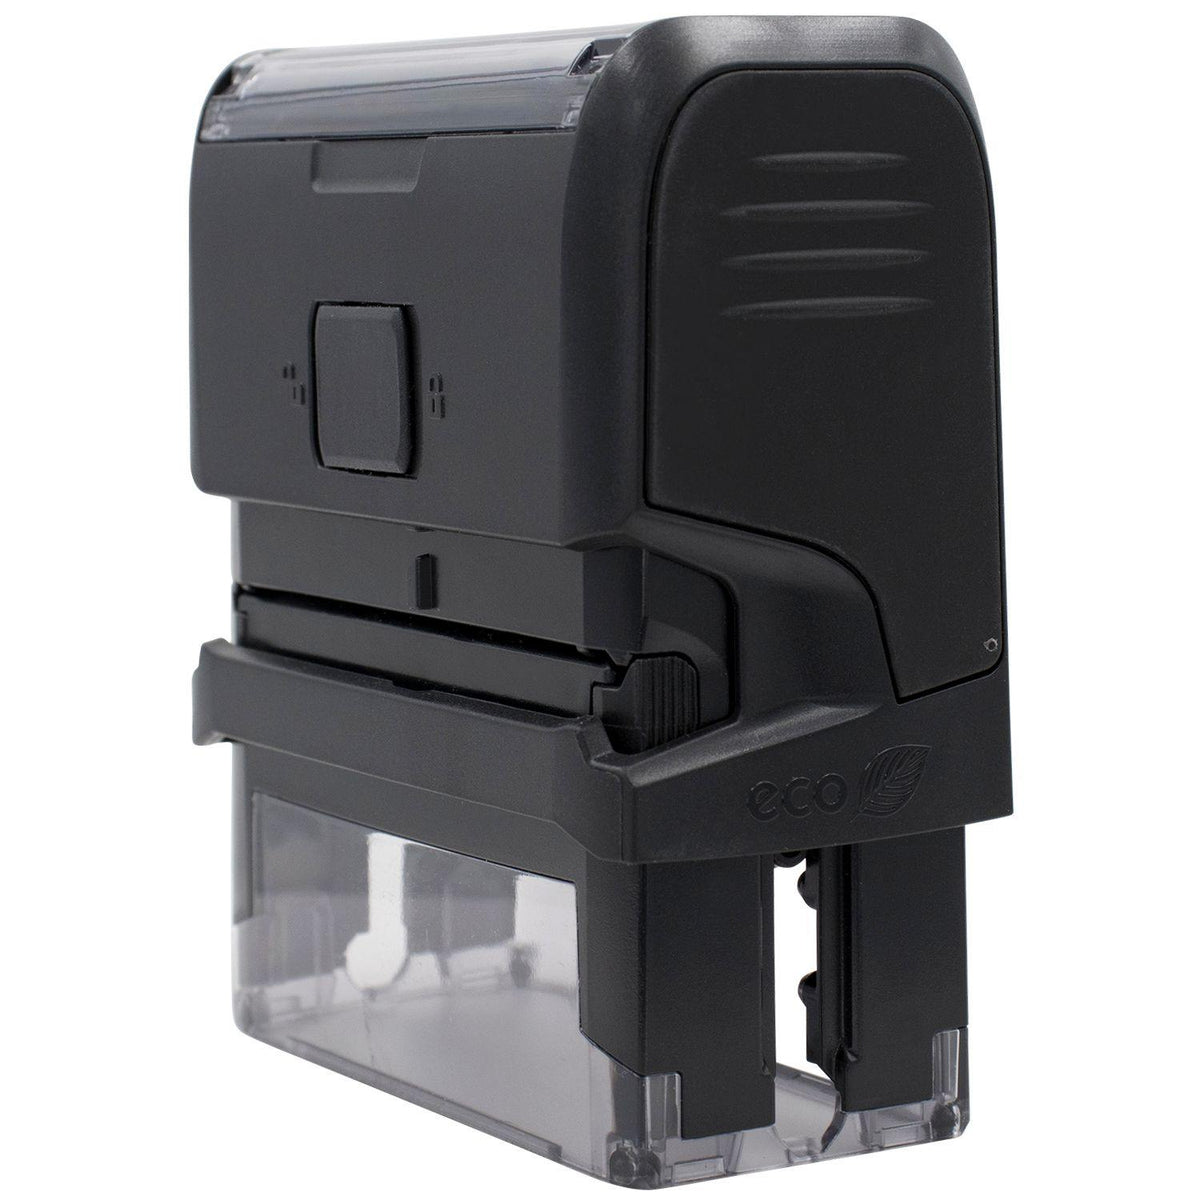 Self-Inking Cleaned and Sanitized Stamp - Engineer Seal Stamps - Brand_Trodat, Impression Size_Small, Stamp Type_Self-Inking Stamp, Type of Use_Medical Office